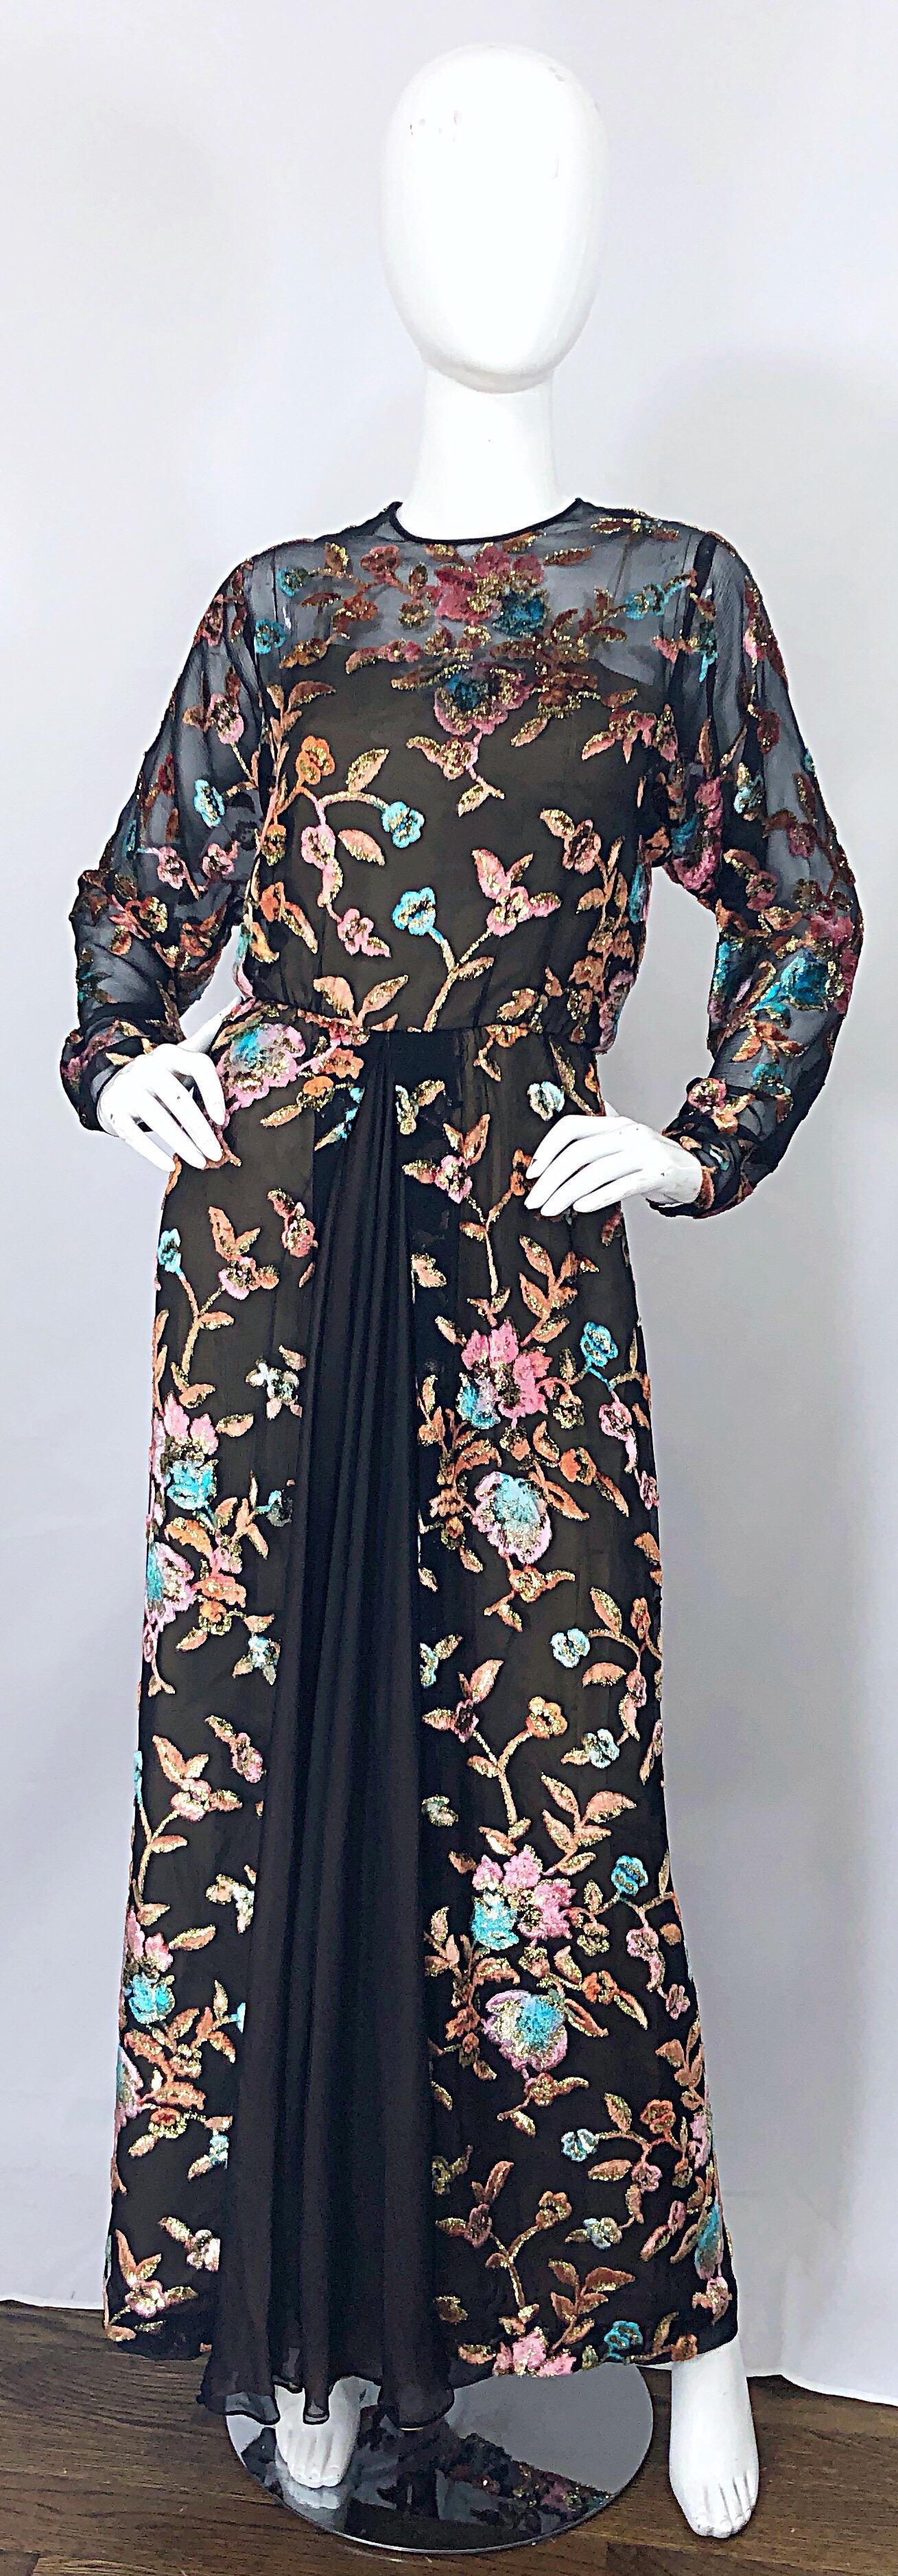 Beautiful vintage larger size RICHILENE long sleeve silk chiffon / cut velvet evening gown! Richilene was a very high end label in the 70s / 80s, and were known for impeccable construction. This gem is a true testament to that!
Features a nude silk